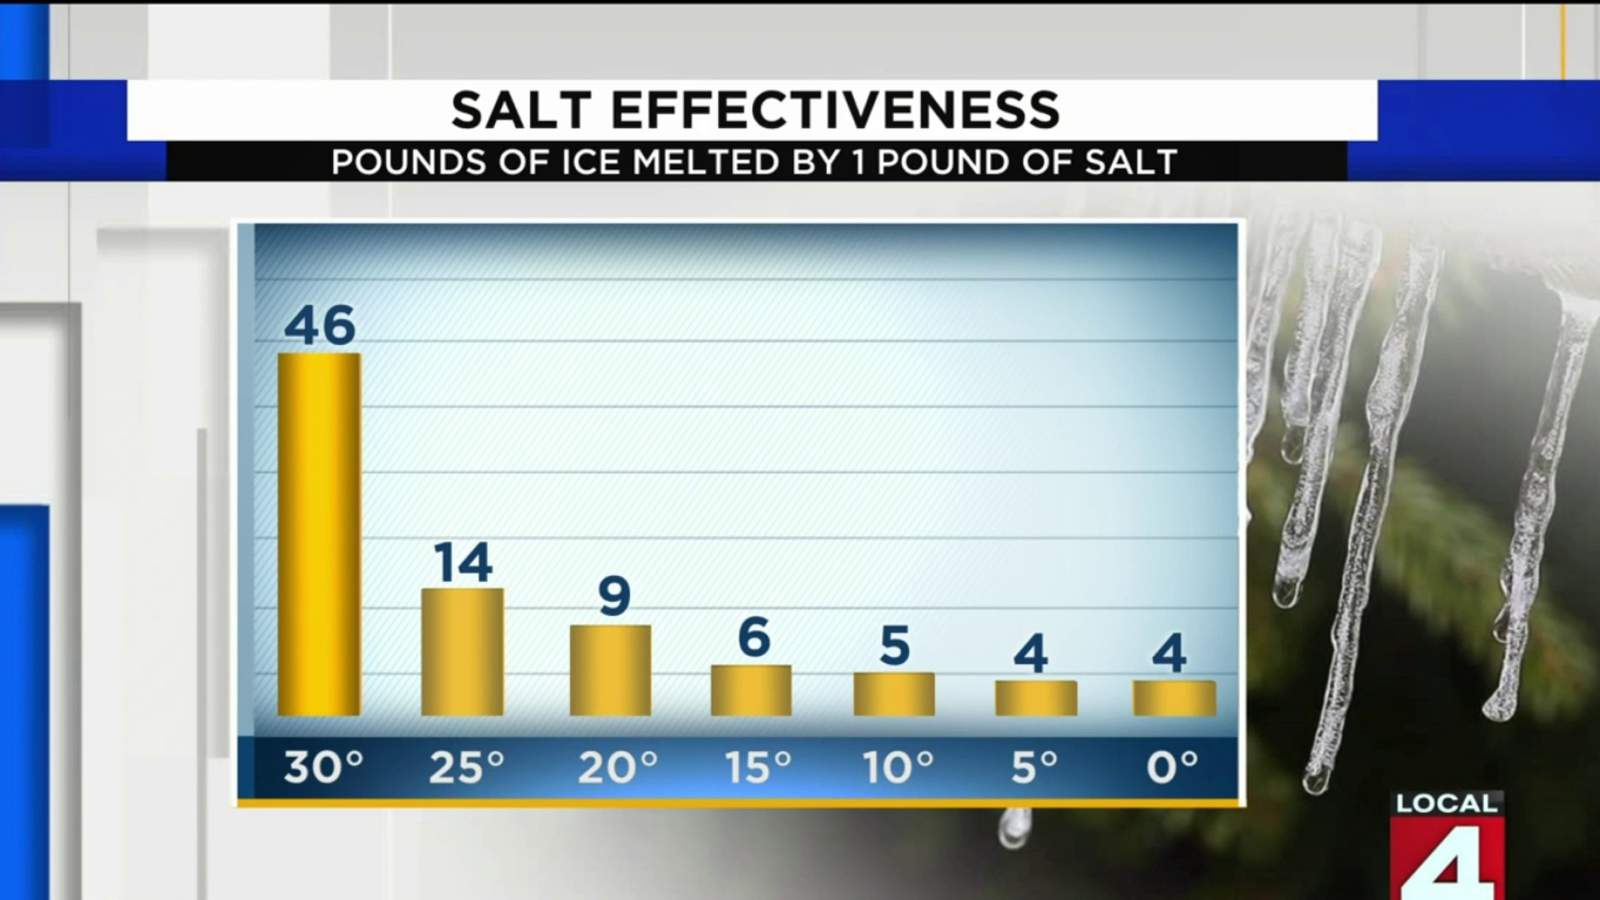 How effective is salt in extremely cold weather?